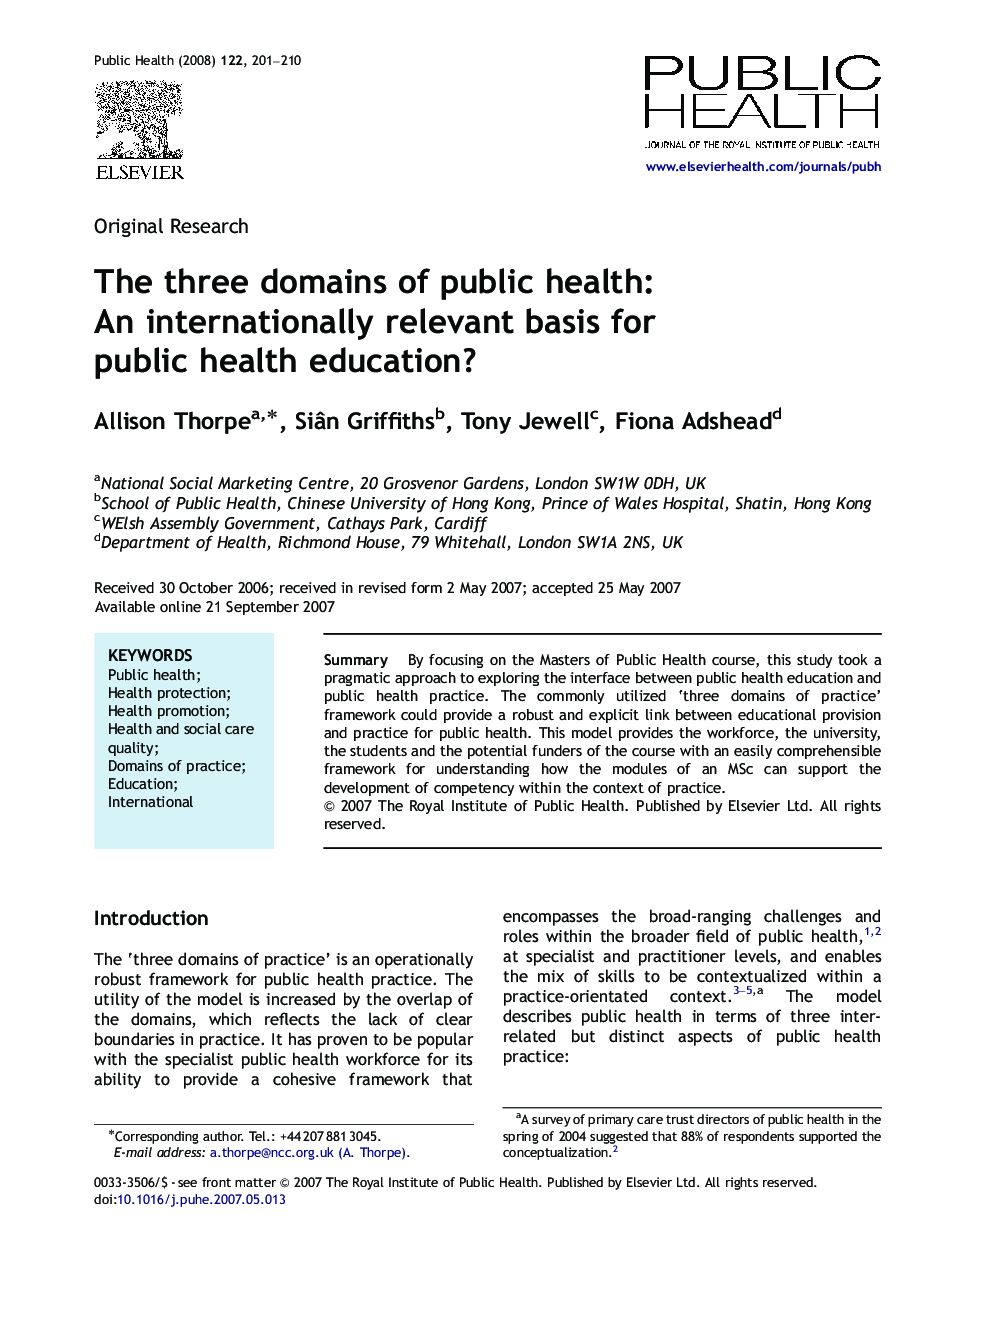 The three domains of public health: An internationally relevant basis for public health education?